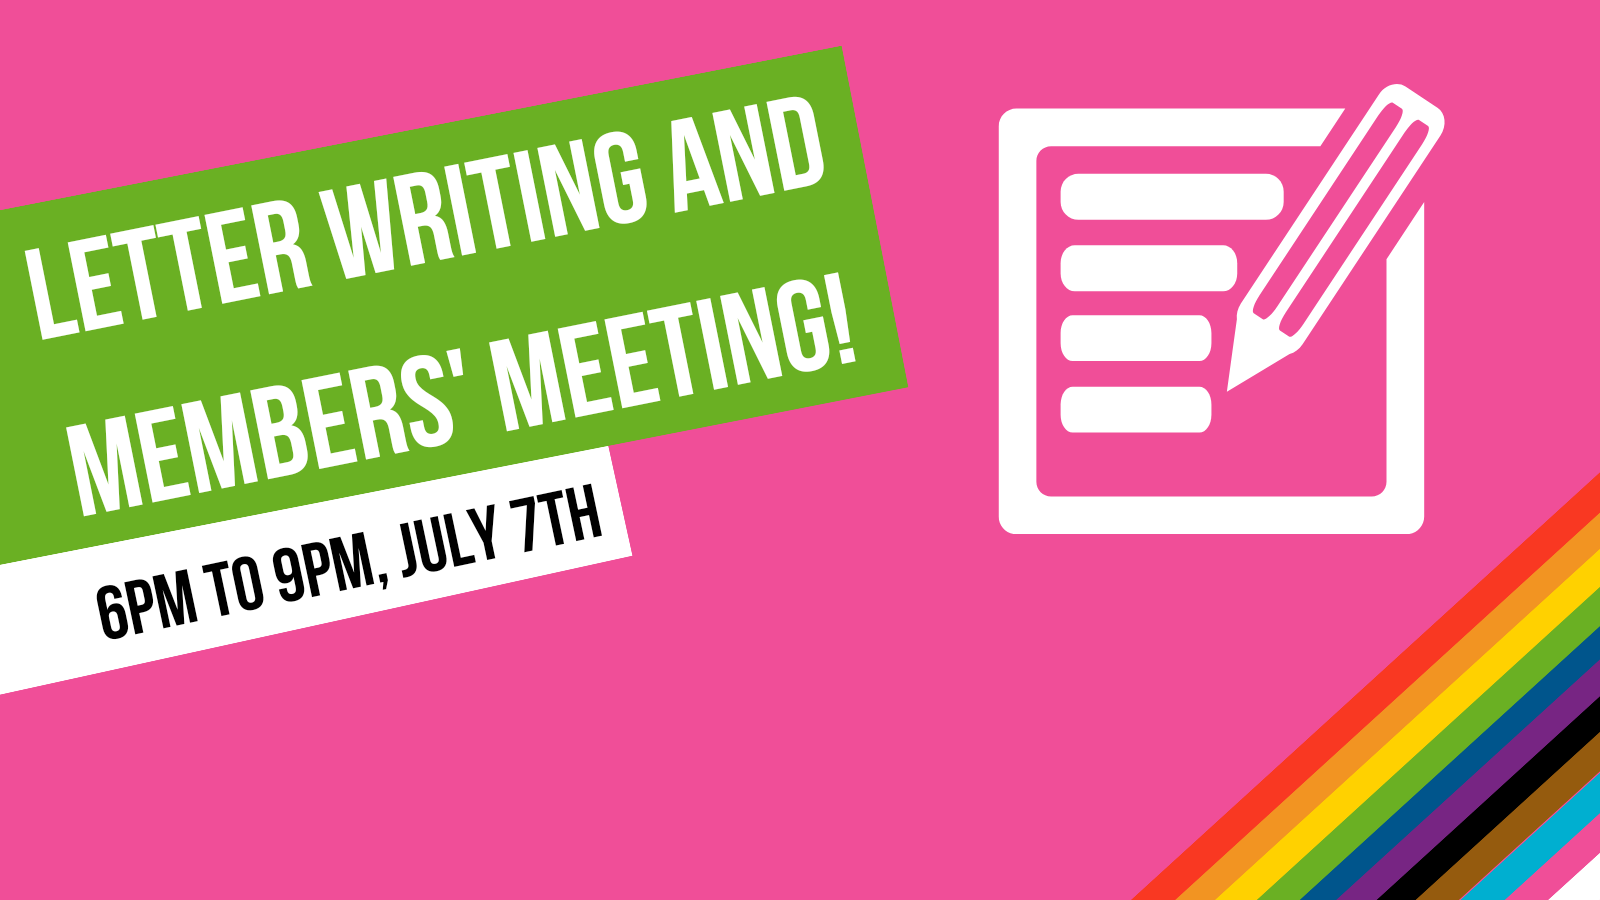 Letter Writing and Members Meeting 6pm-9pm, July 7th